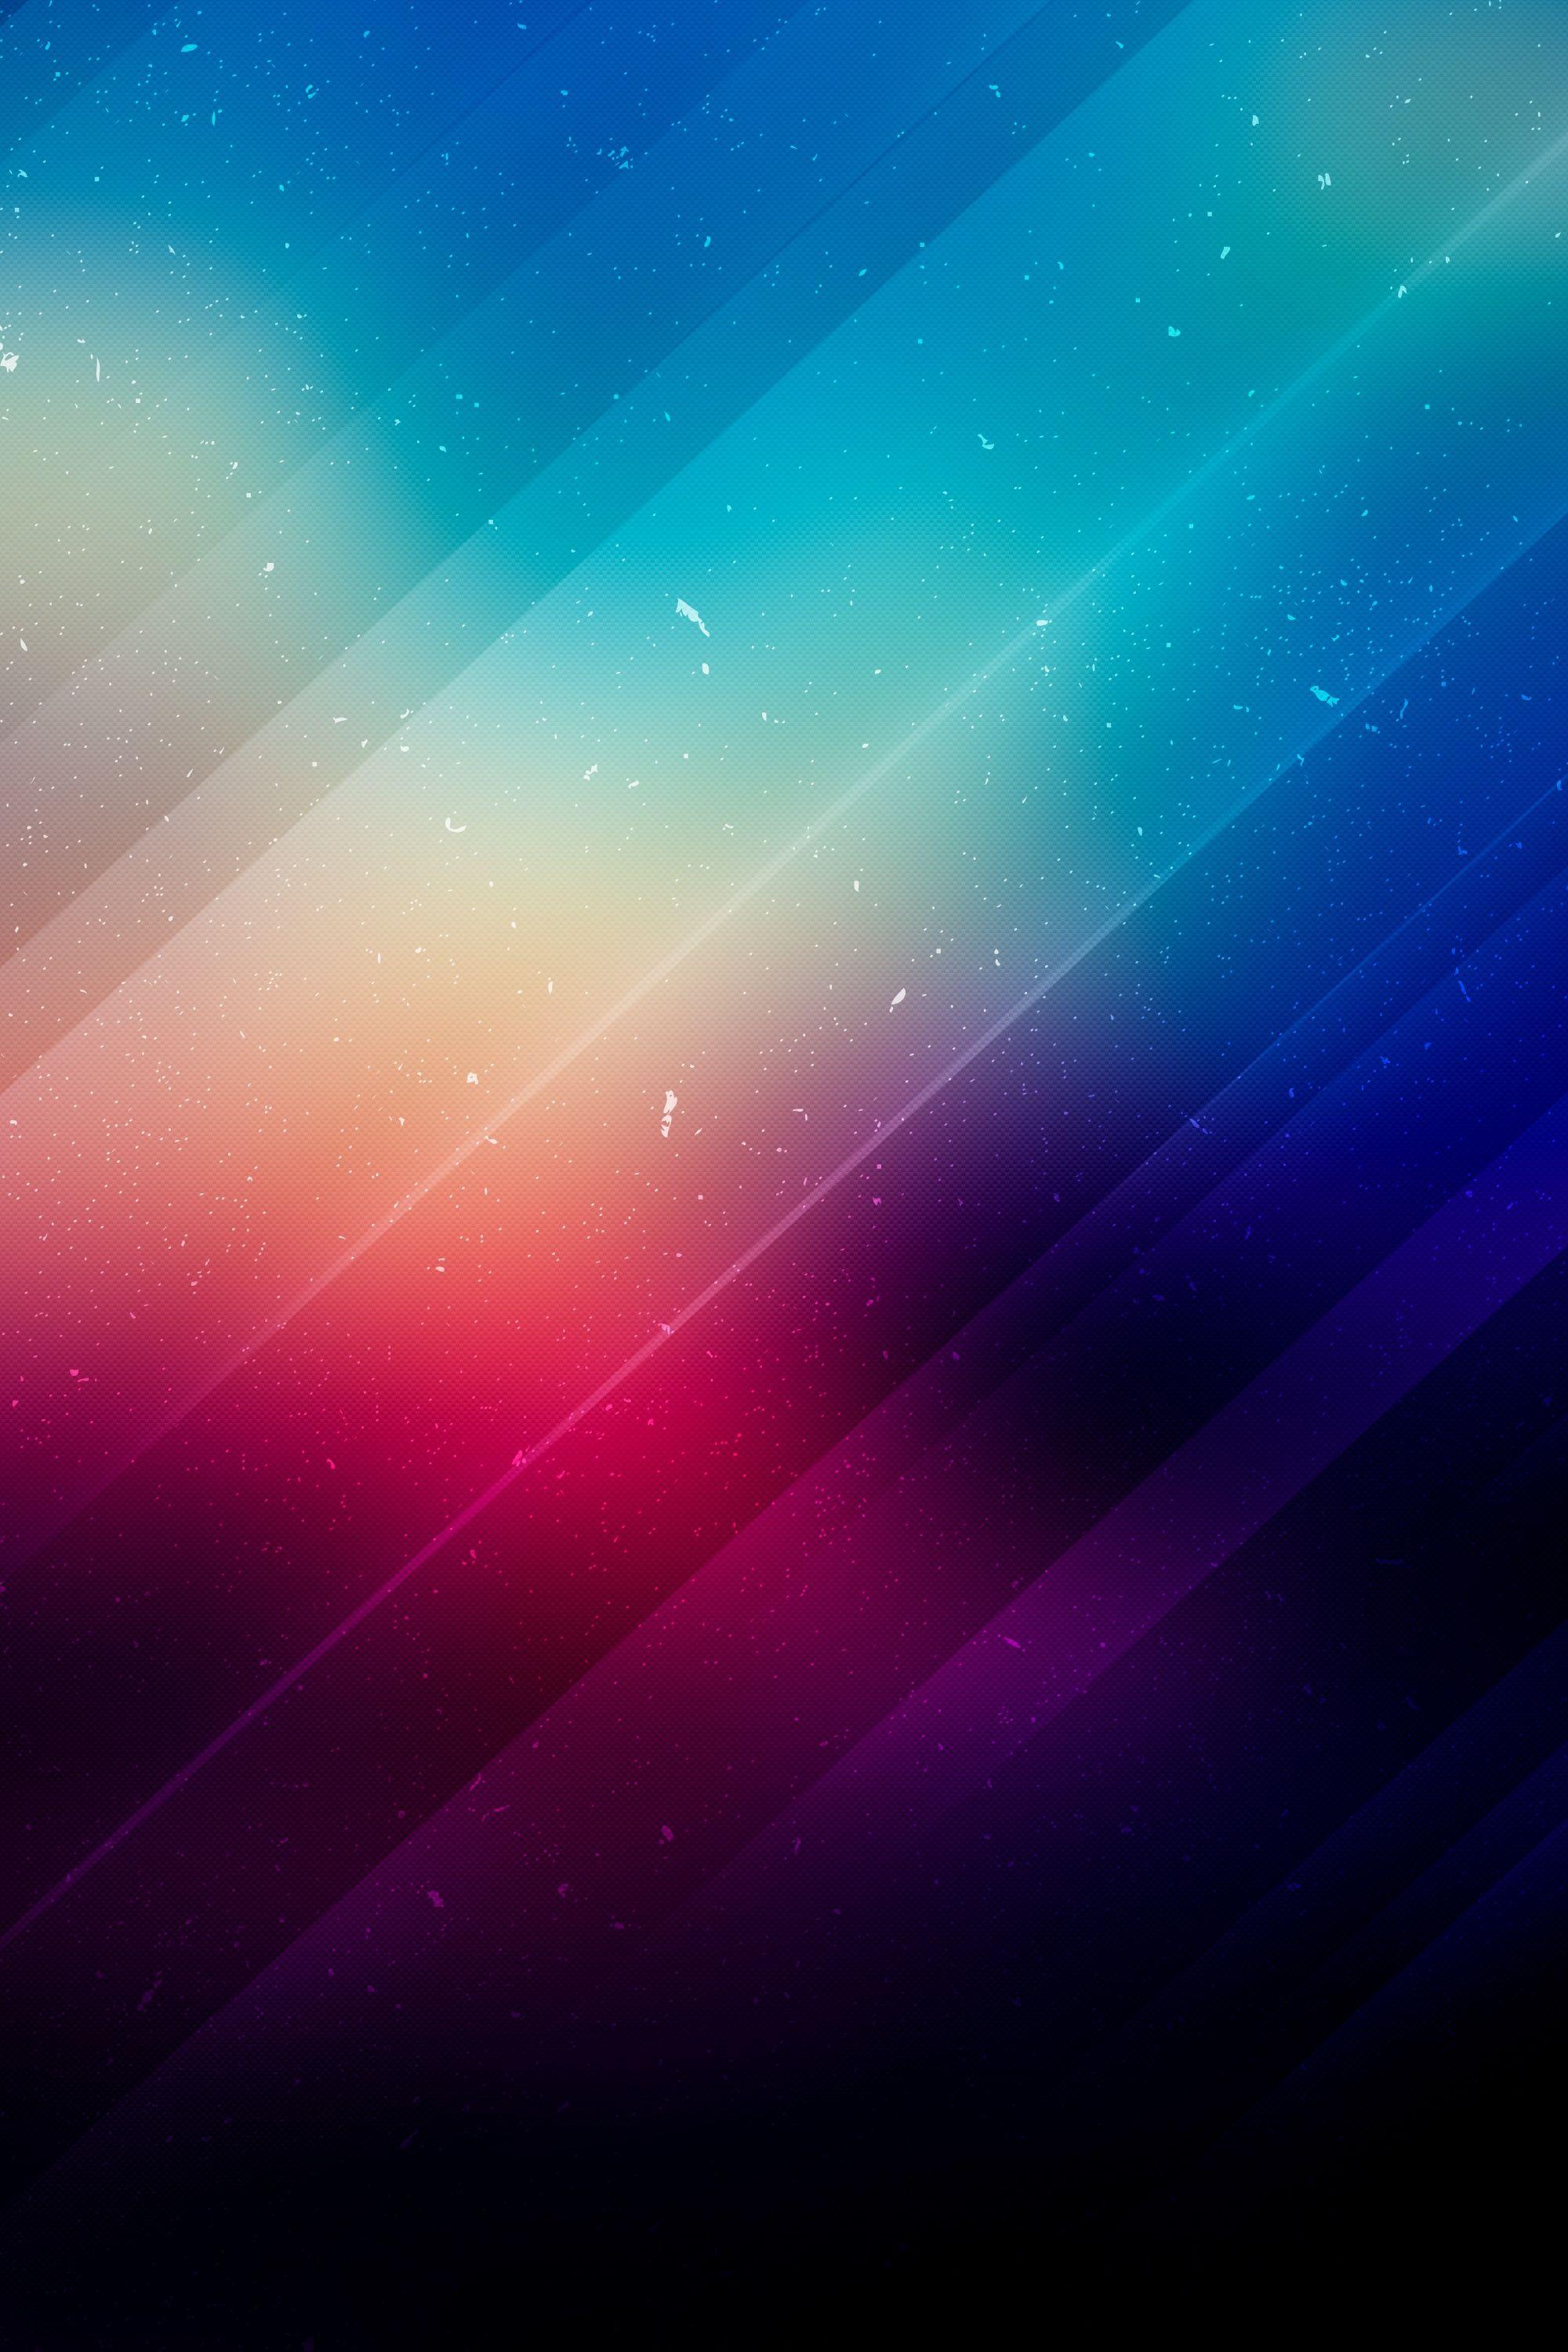 Abstract Ipad Wallpapers Top Free Abstract Ipad Backgrounds